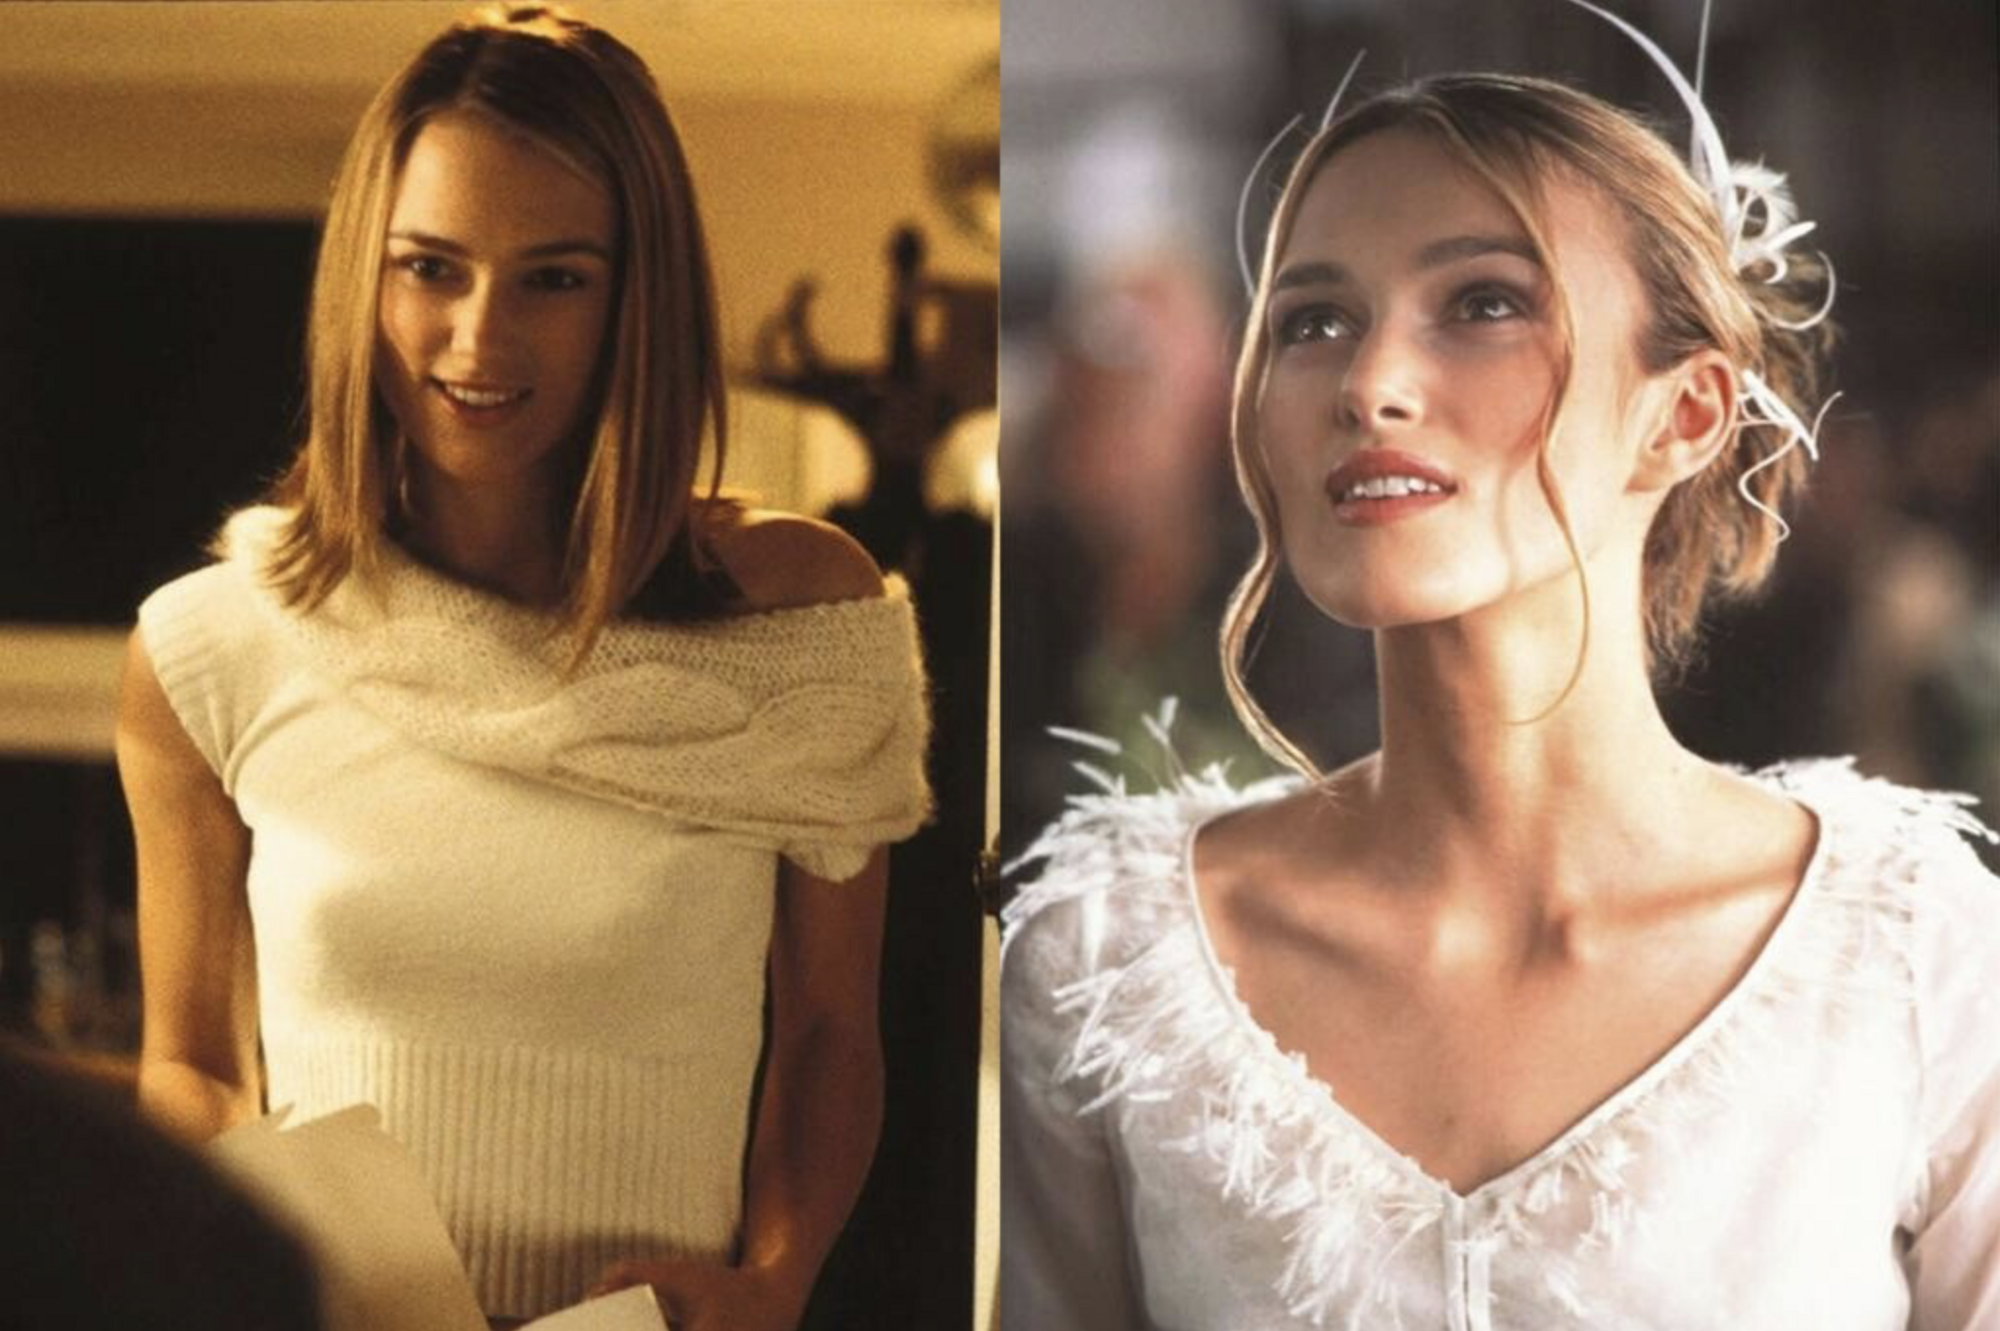 The 10 most stylish heroines of Christmas movies: their images inspire. Photo